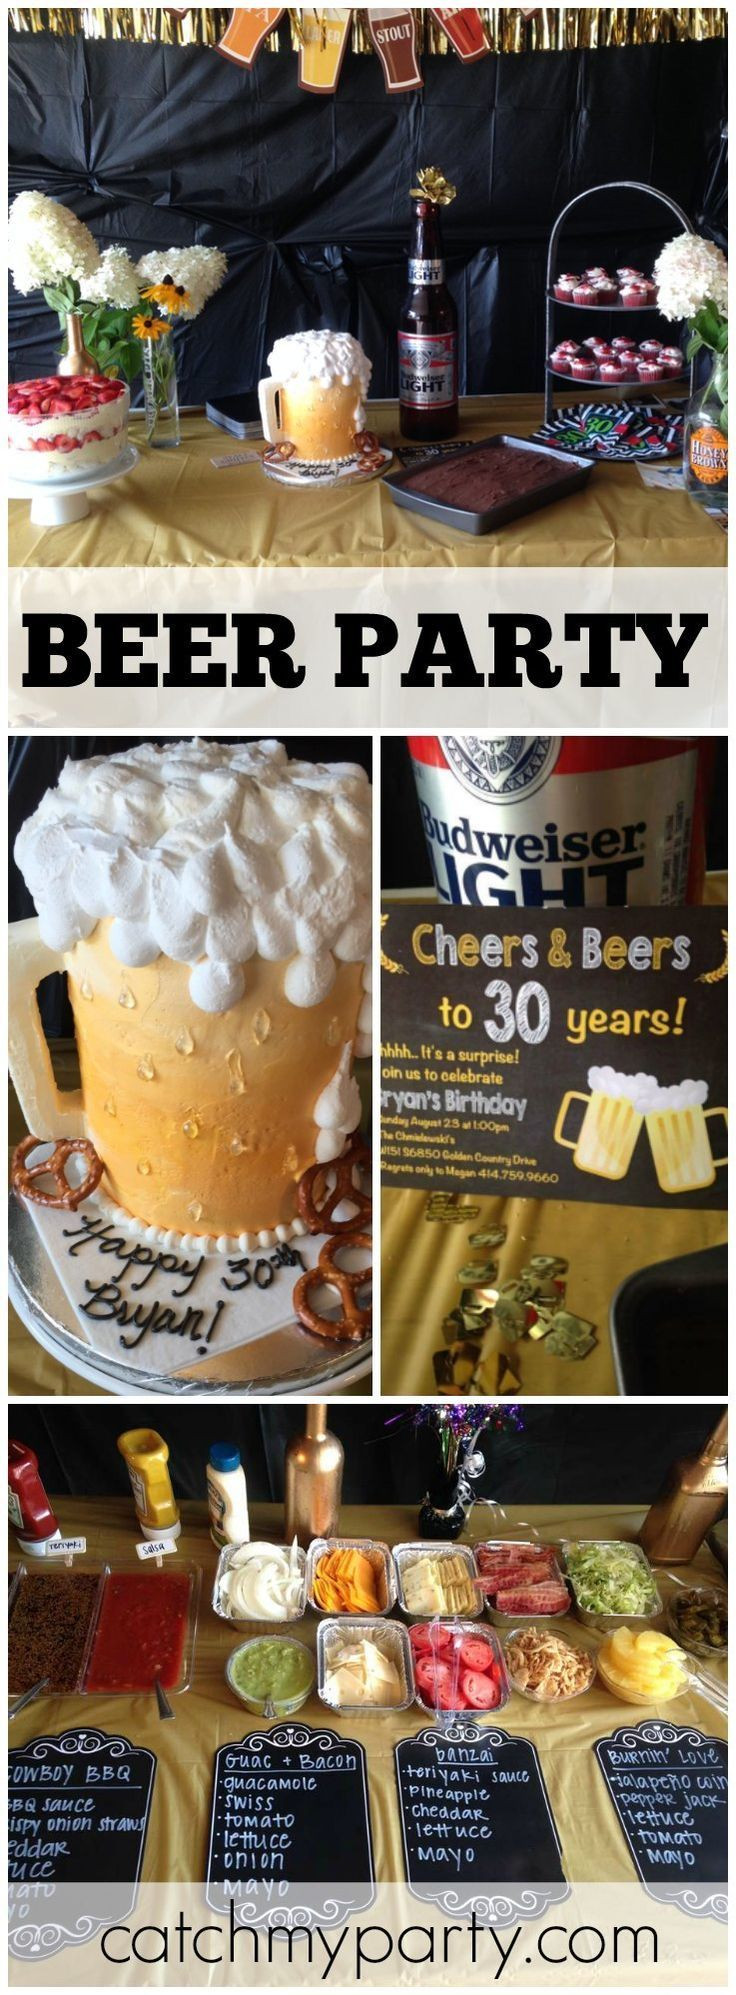 Guy Birthday Party Ideas
 Beer is the theme for this 30th birthday party See more